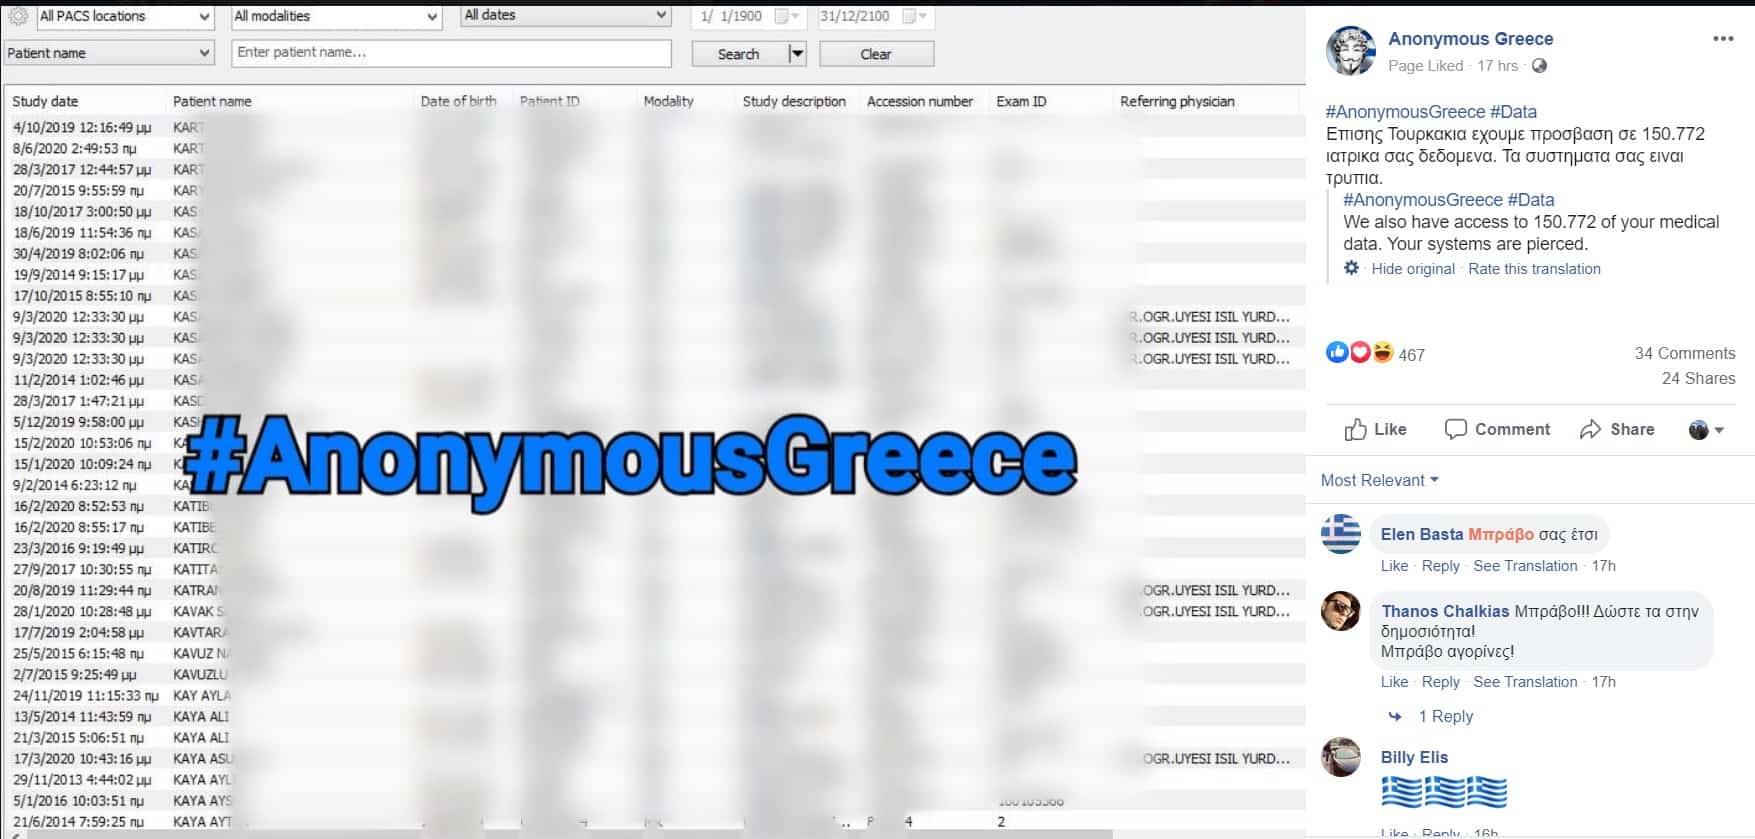 Greek hackers continue revenge attack by accessing sensitive Turkish data 2